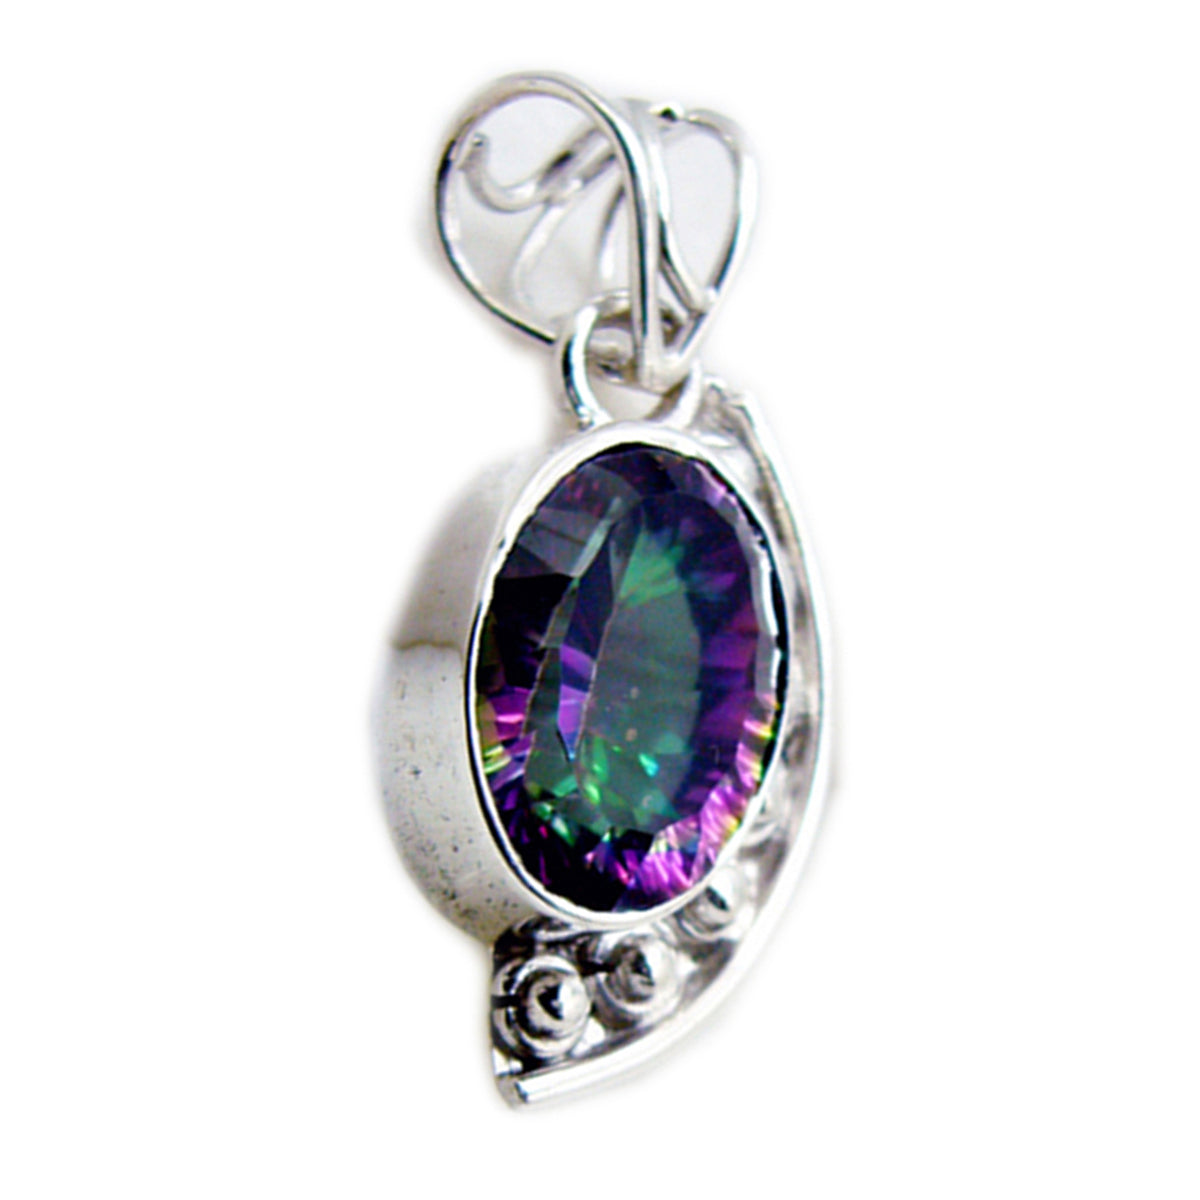 Riyo Bewitching Gemstone Oval Faceted Multi Color Mystic Quartz Sterling Silver Pendant Gift For Christmas